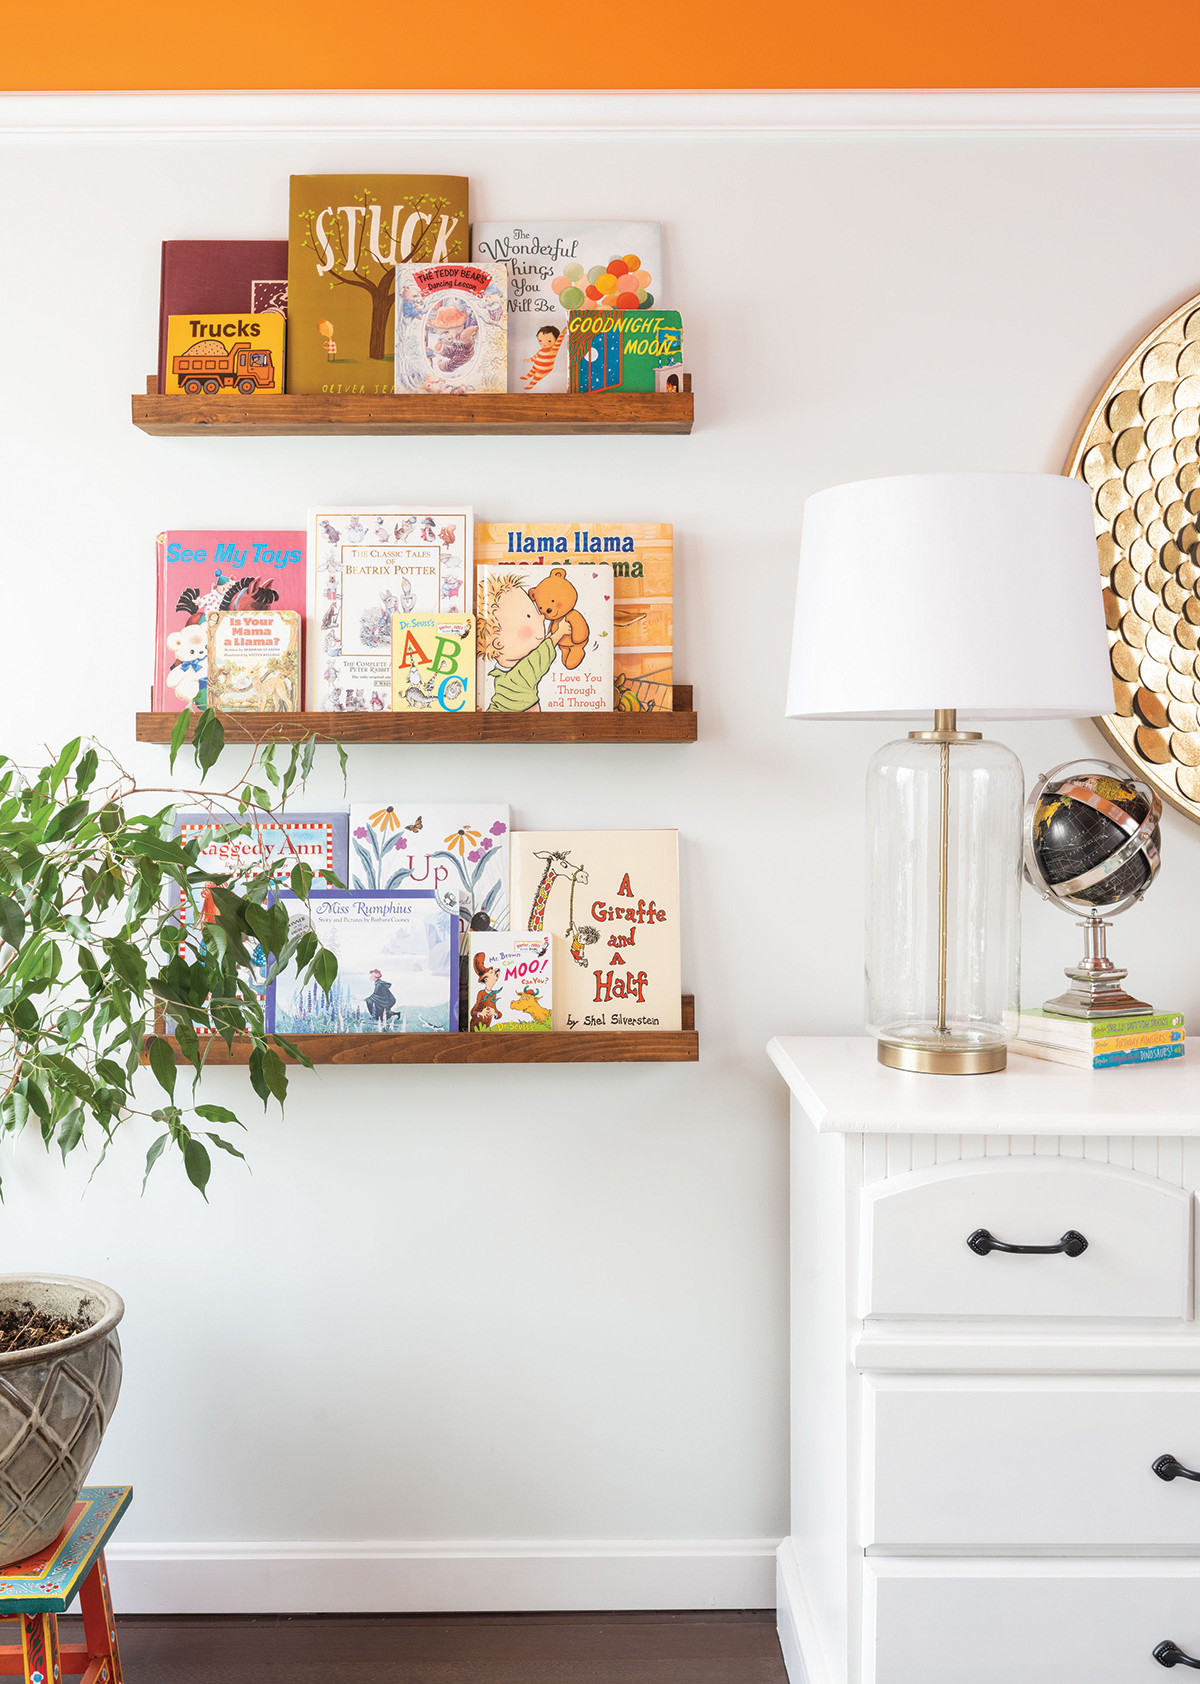 The homeowners used reclaimed lumber for the book ledges in Pierson’s nursery. “It’s the only homemade thing poor Pierson has in his room,” she laughs.